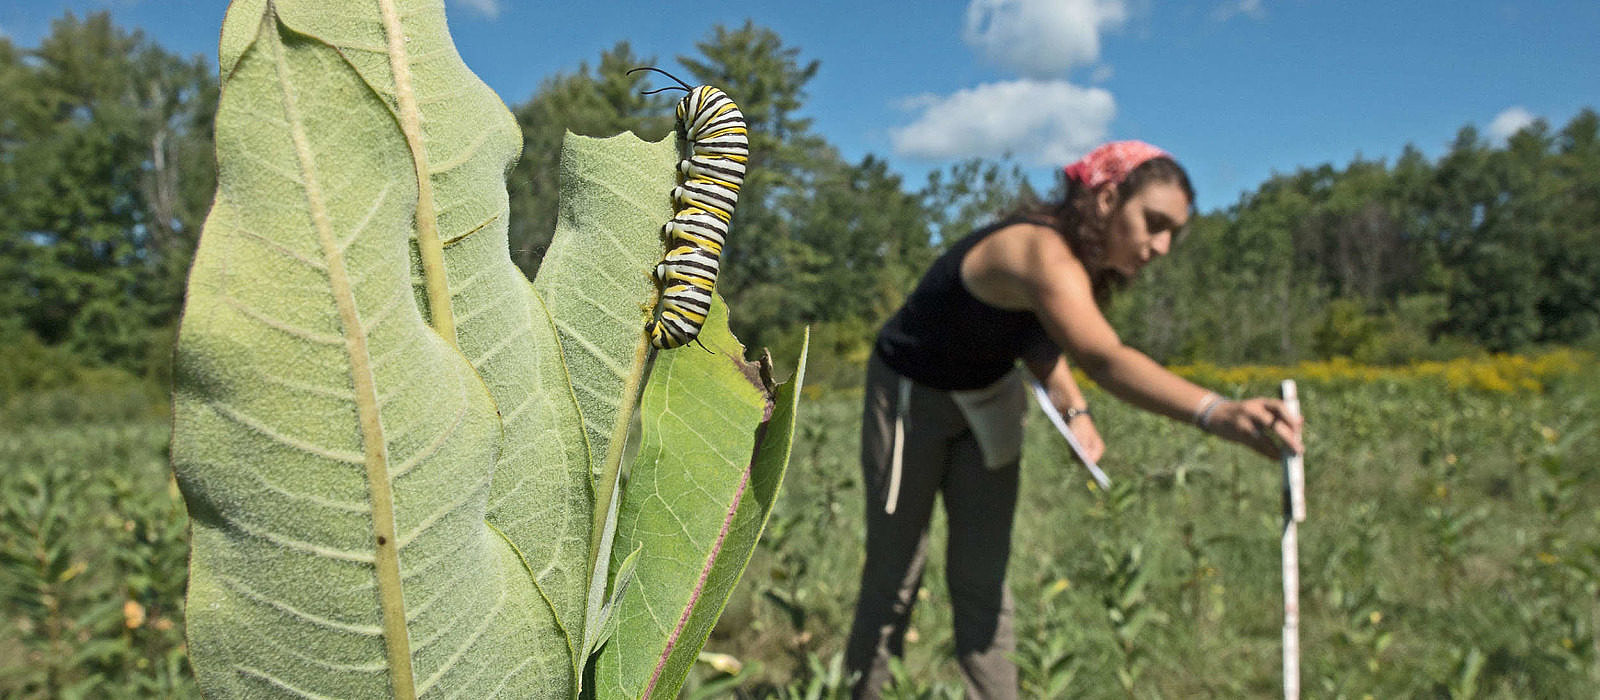 An undergraduate researcher sets out a transect in a milkweed patch in Peterborough. (photo © Mark Wilson)